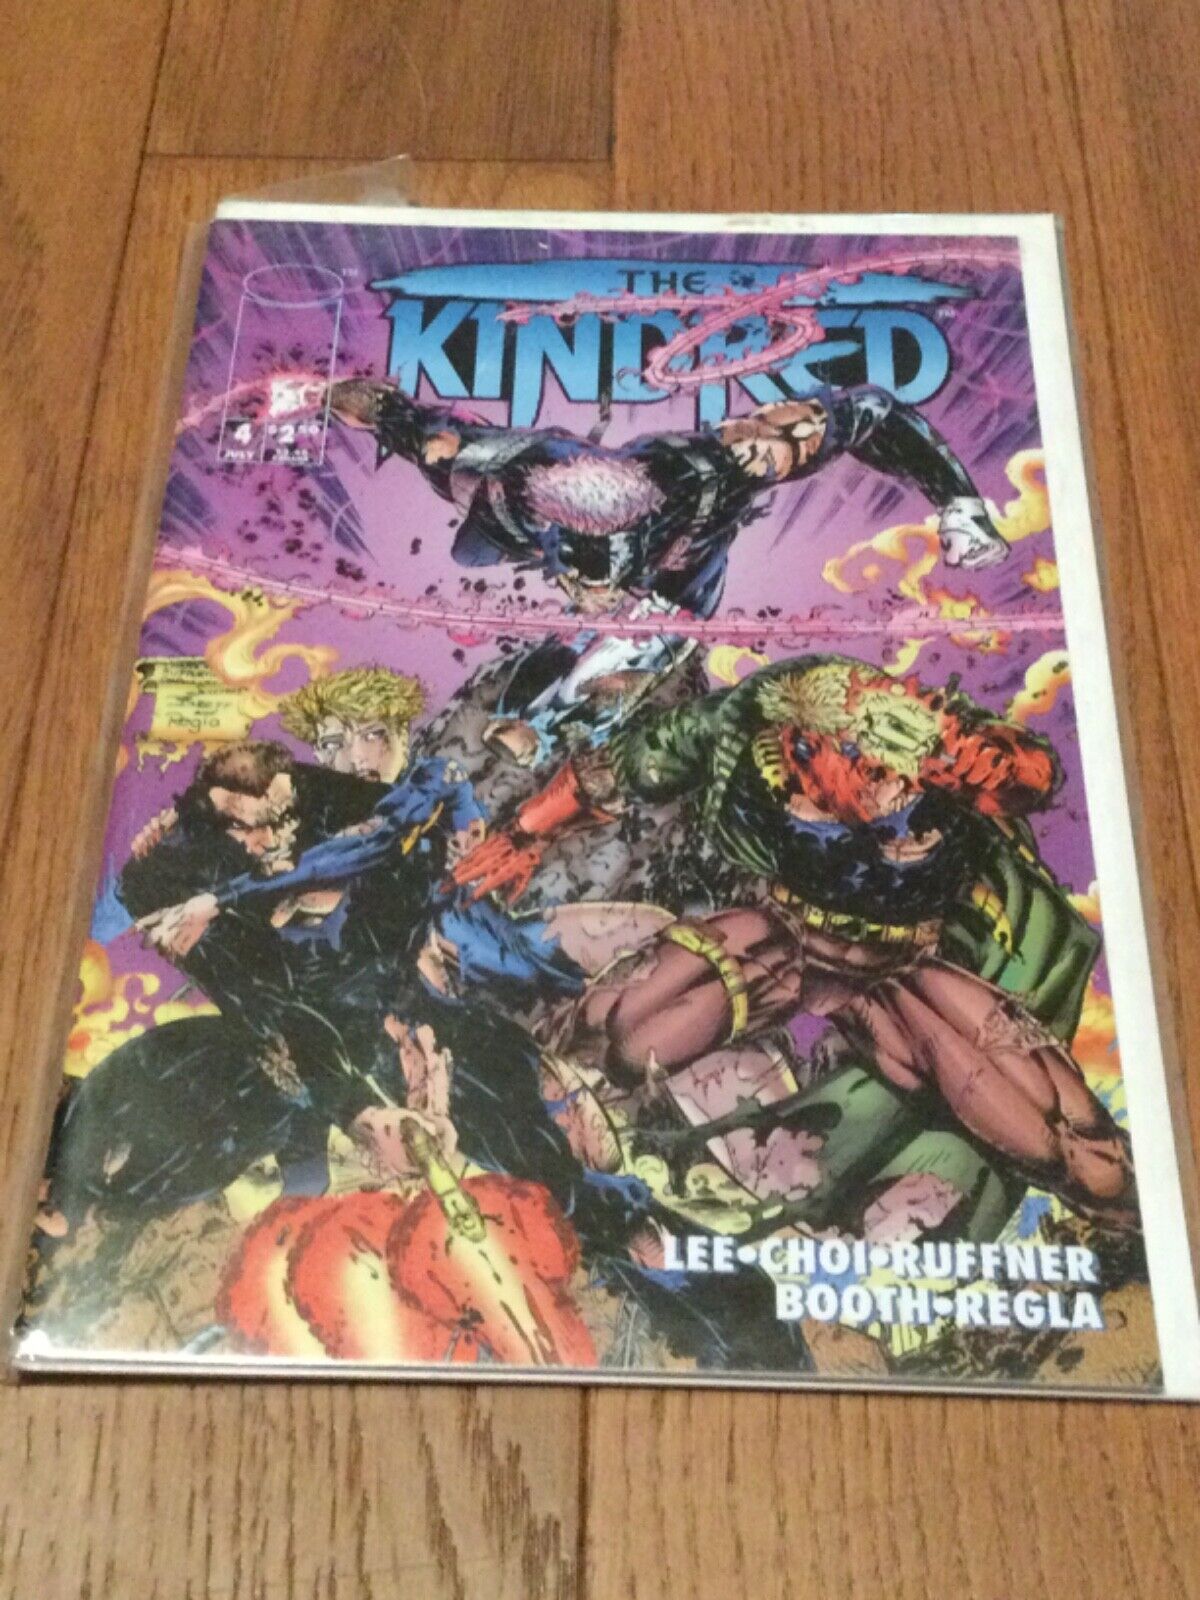 THE KINDRED #4 July 1994 - IMAGE COMICS (#46)